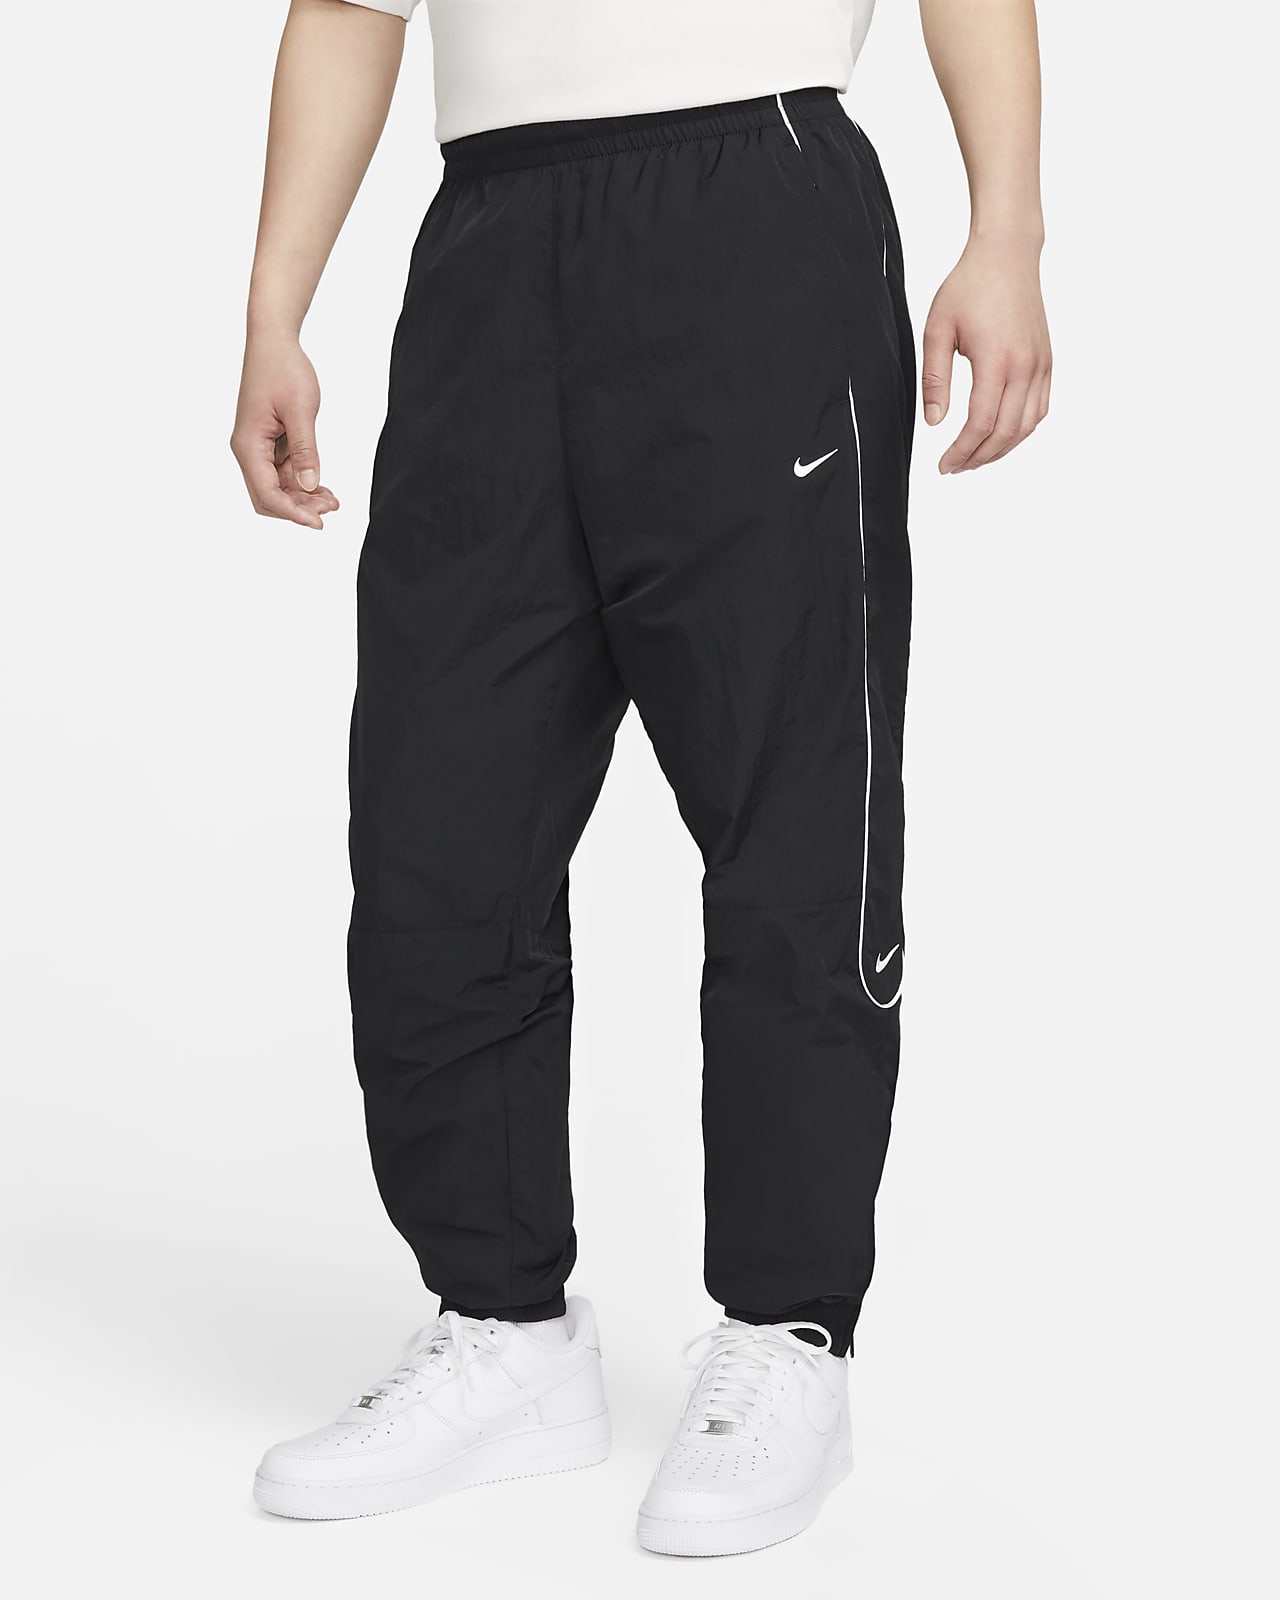 Update more than 180 nike track pants